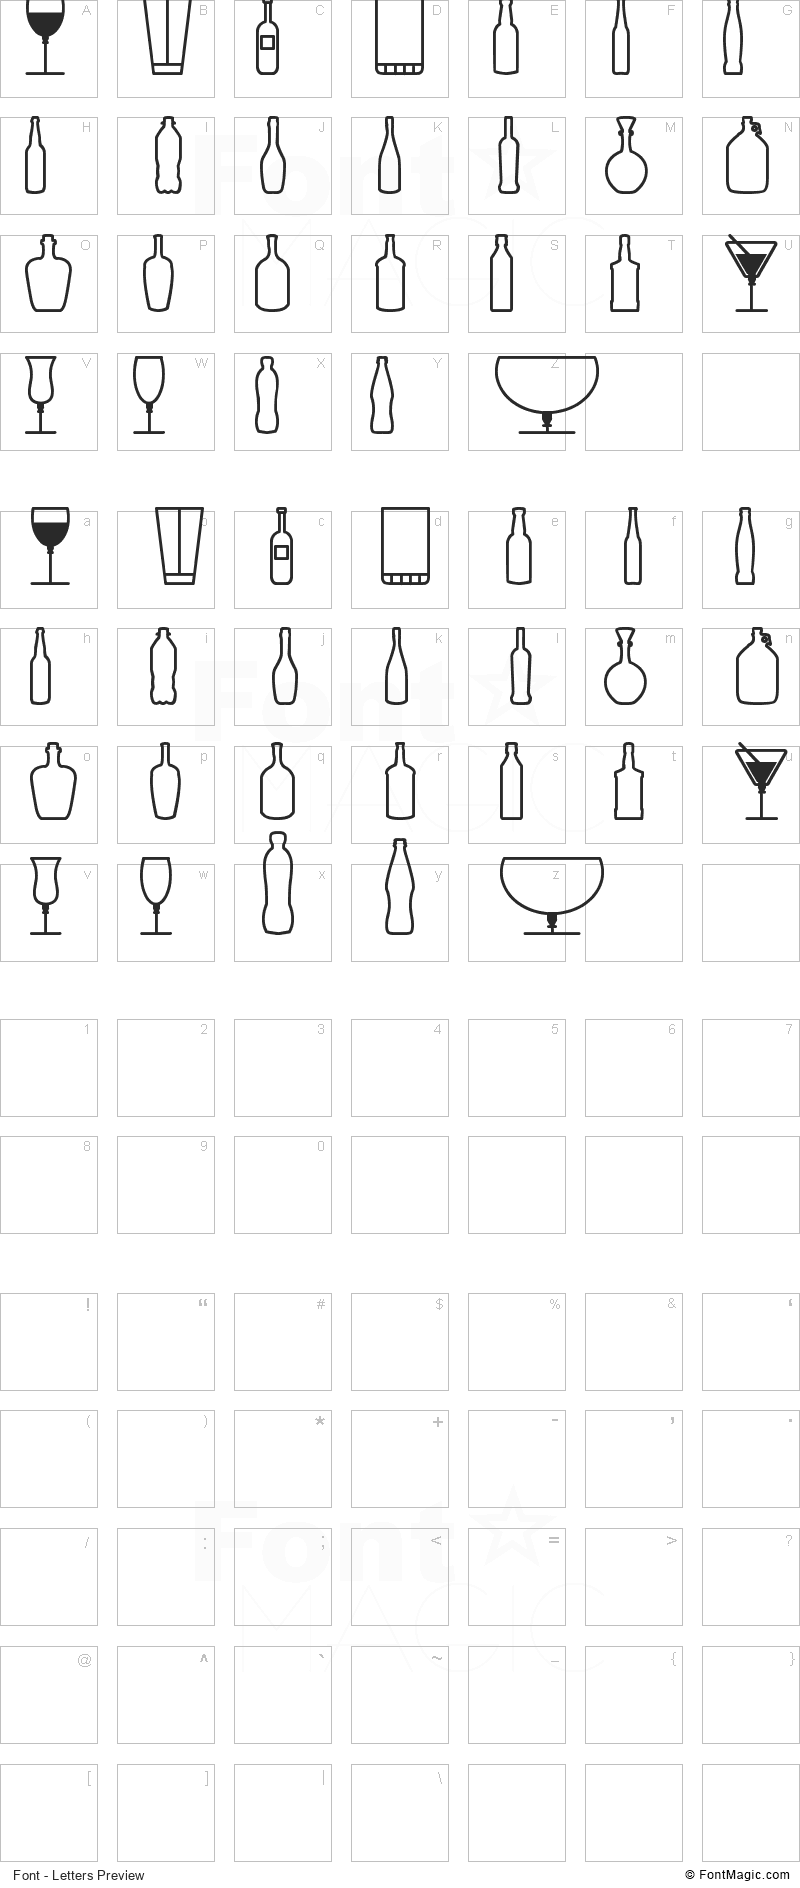 Glass and bottles St Font - All Latters Preview Chart